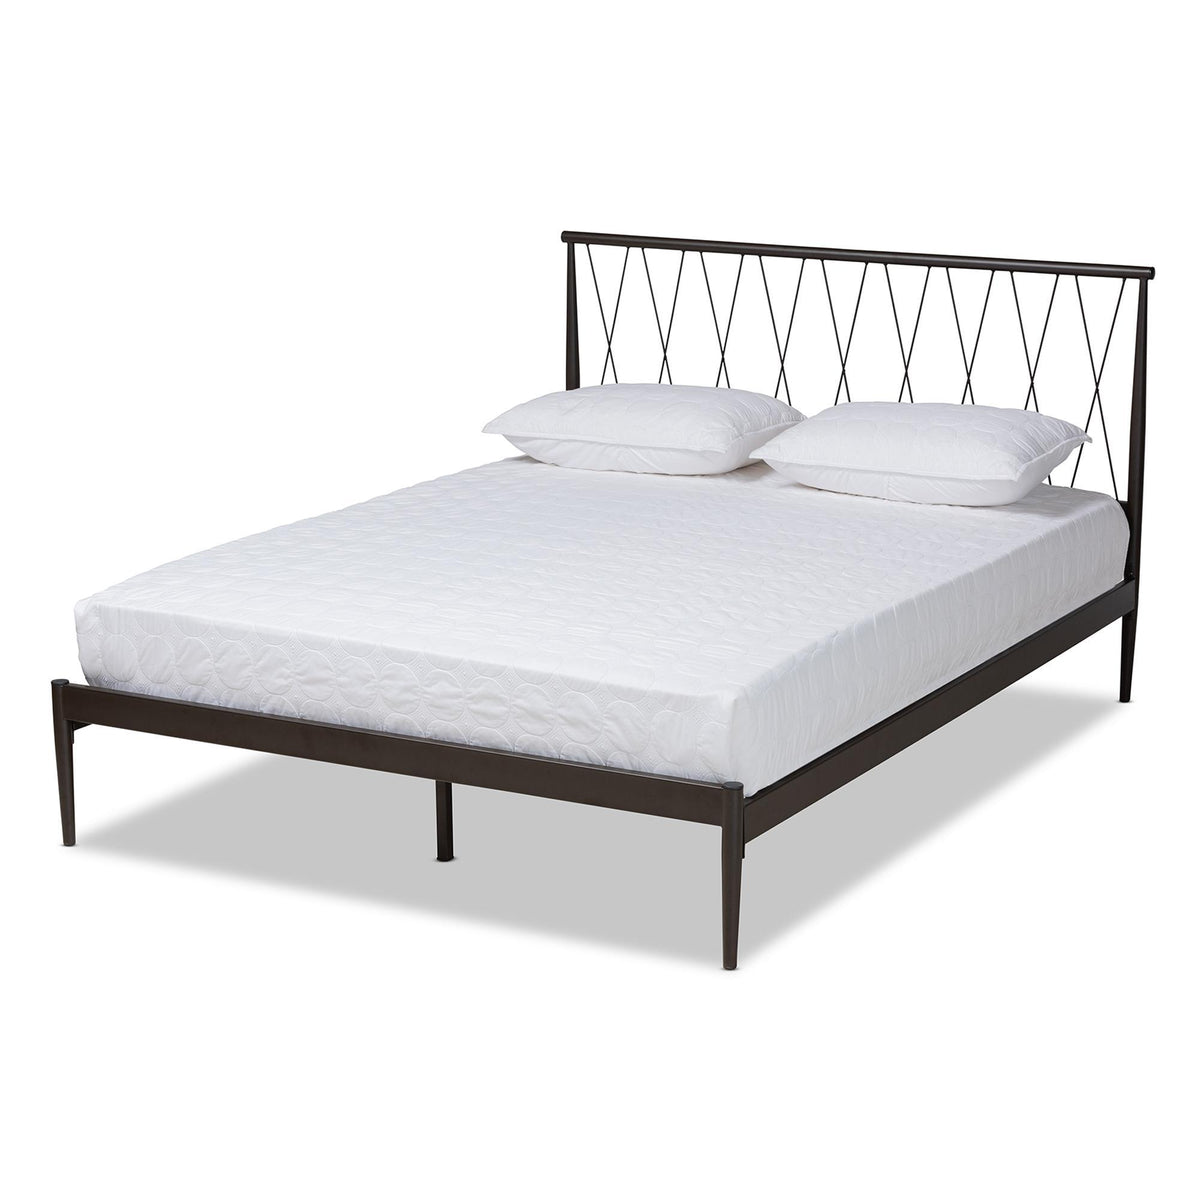 Baxton Studio Nano Modern And Contemporary Black Finished Metal Queen Size Platform Bed - TS-Nano-Black-Queen